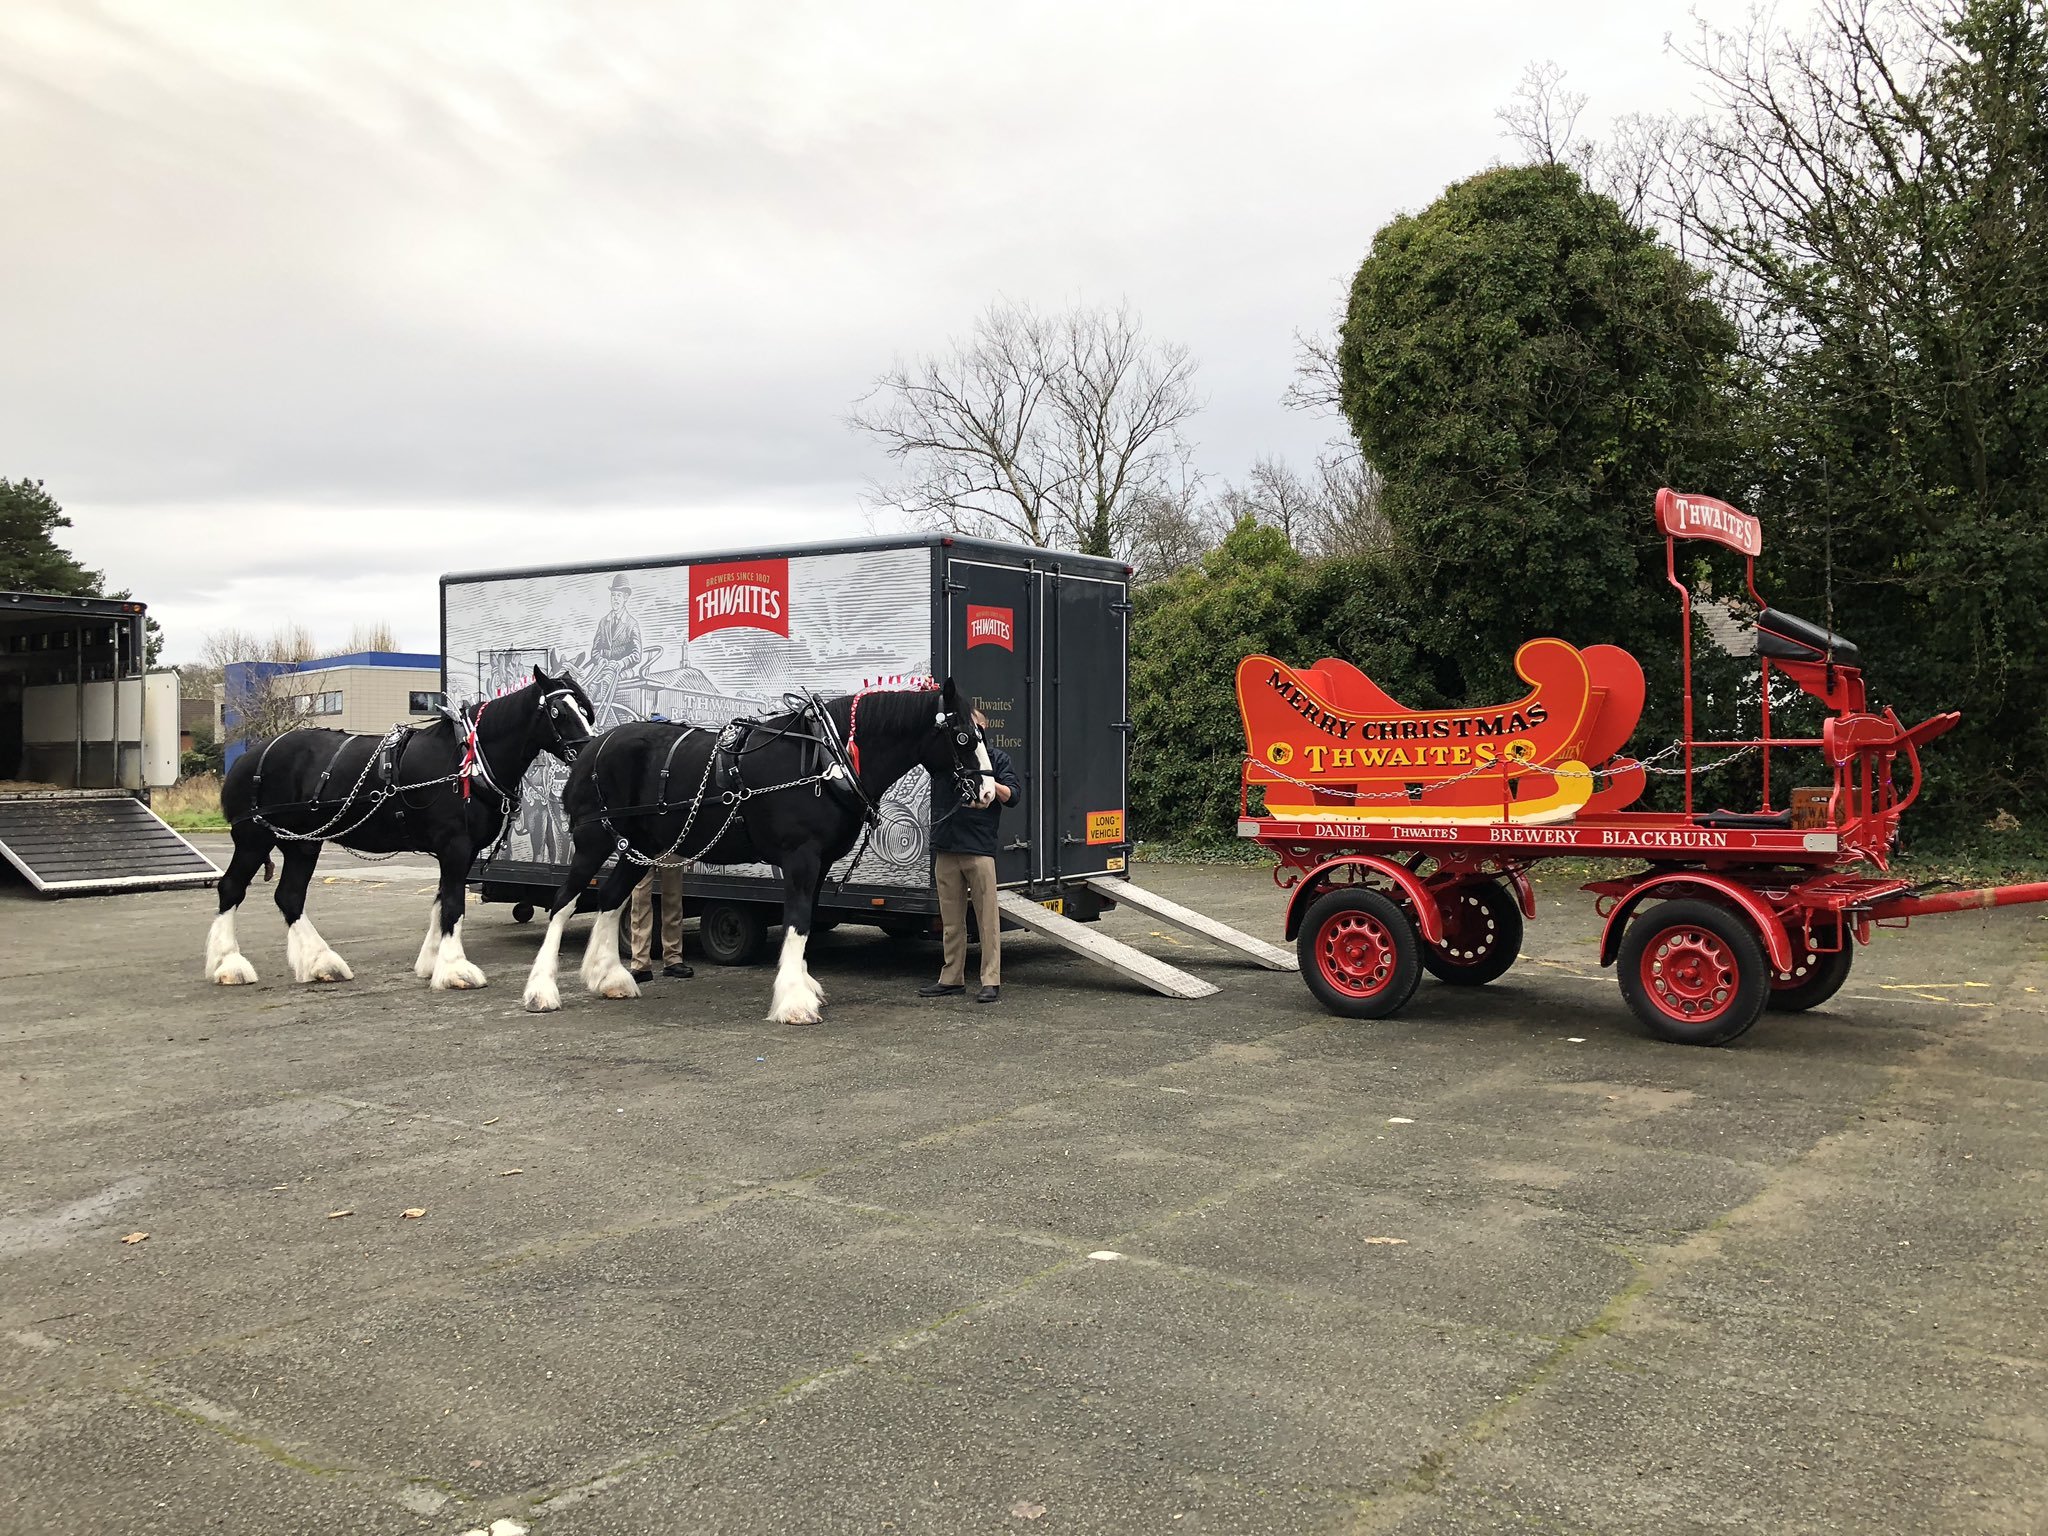 Shire horses will be amongst the many attractions at the fair